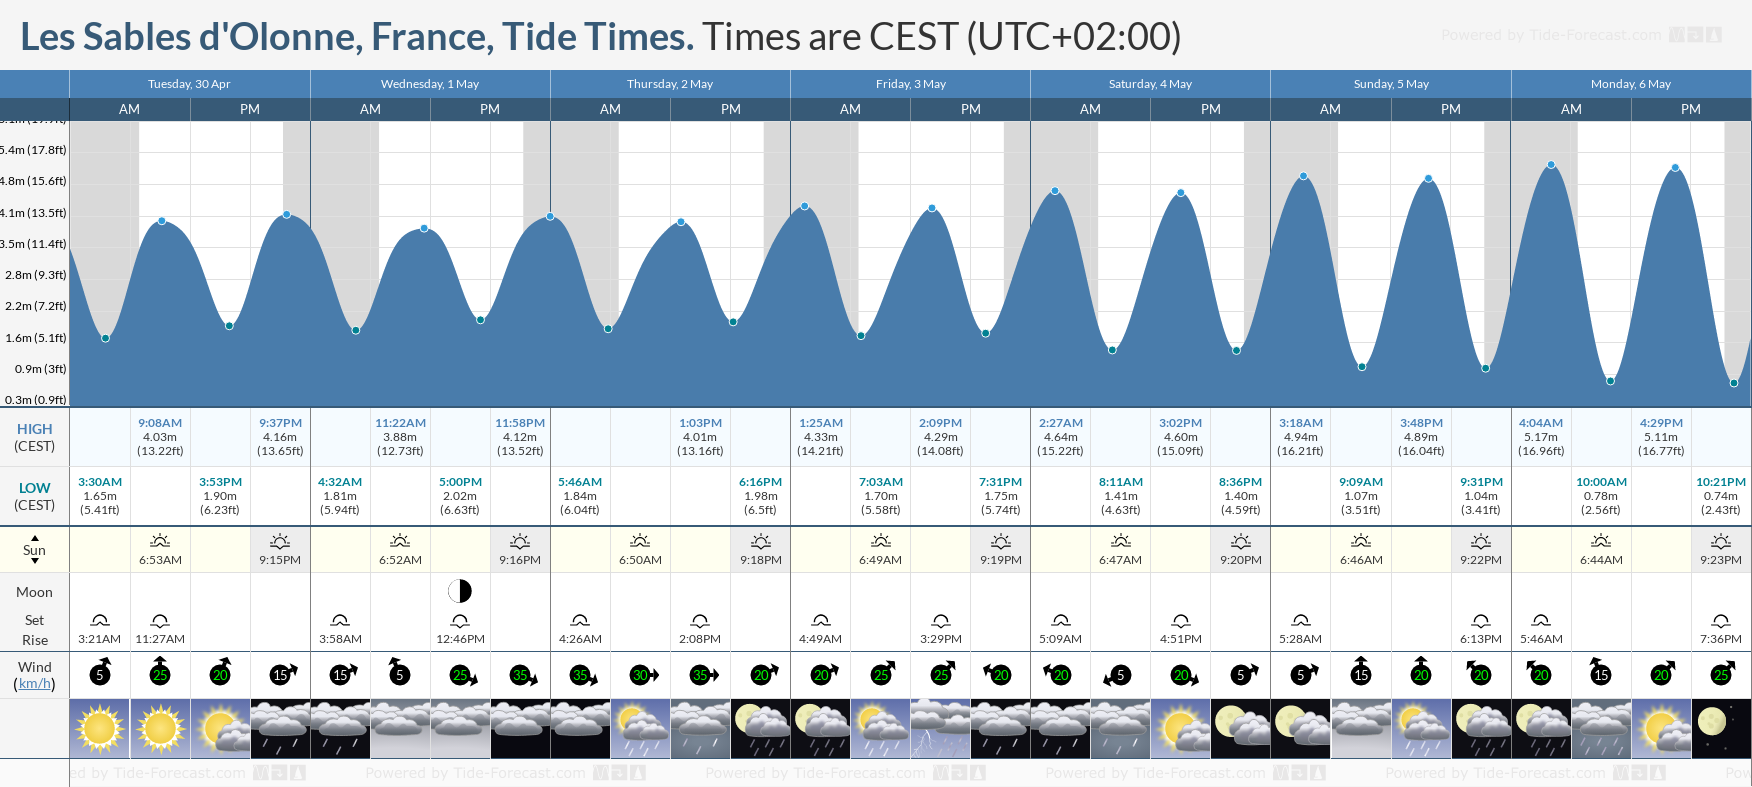 Les Sables d'Olonne, France Tide Chart including high and low tide tide times for the next 7 days